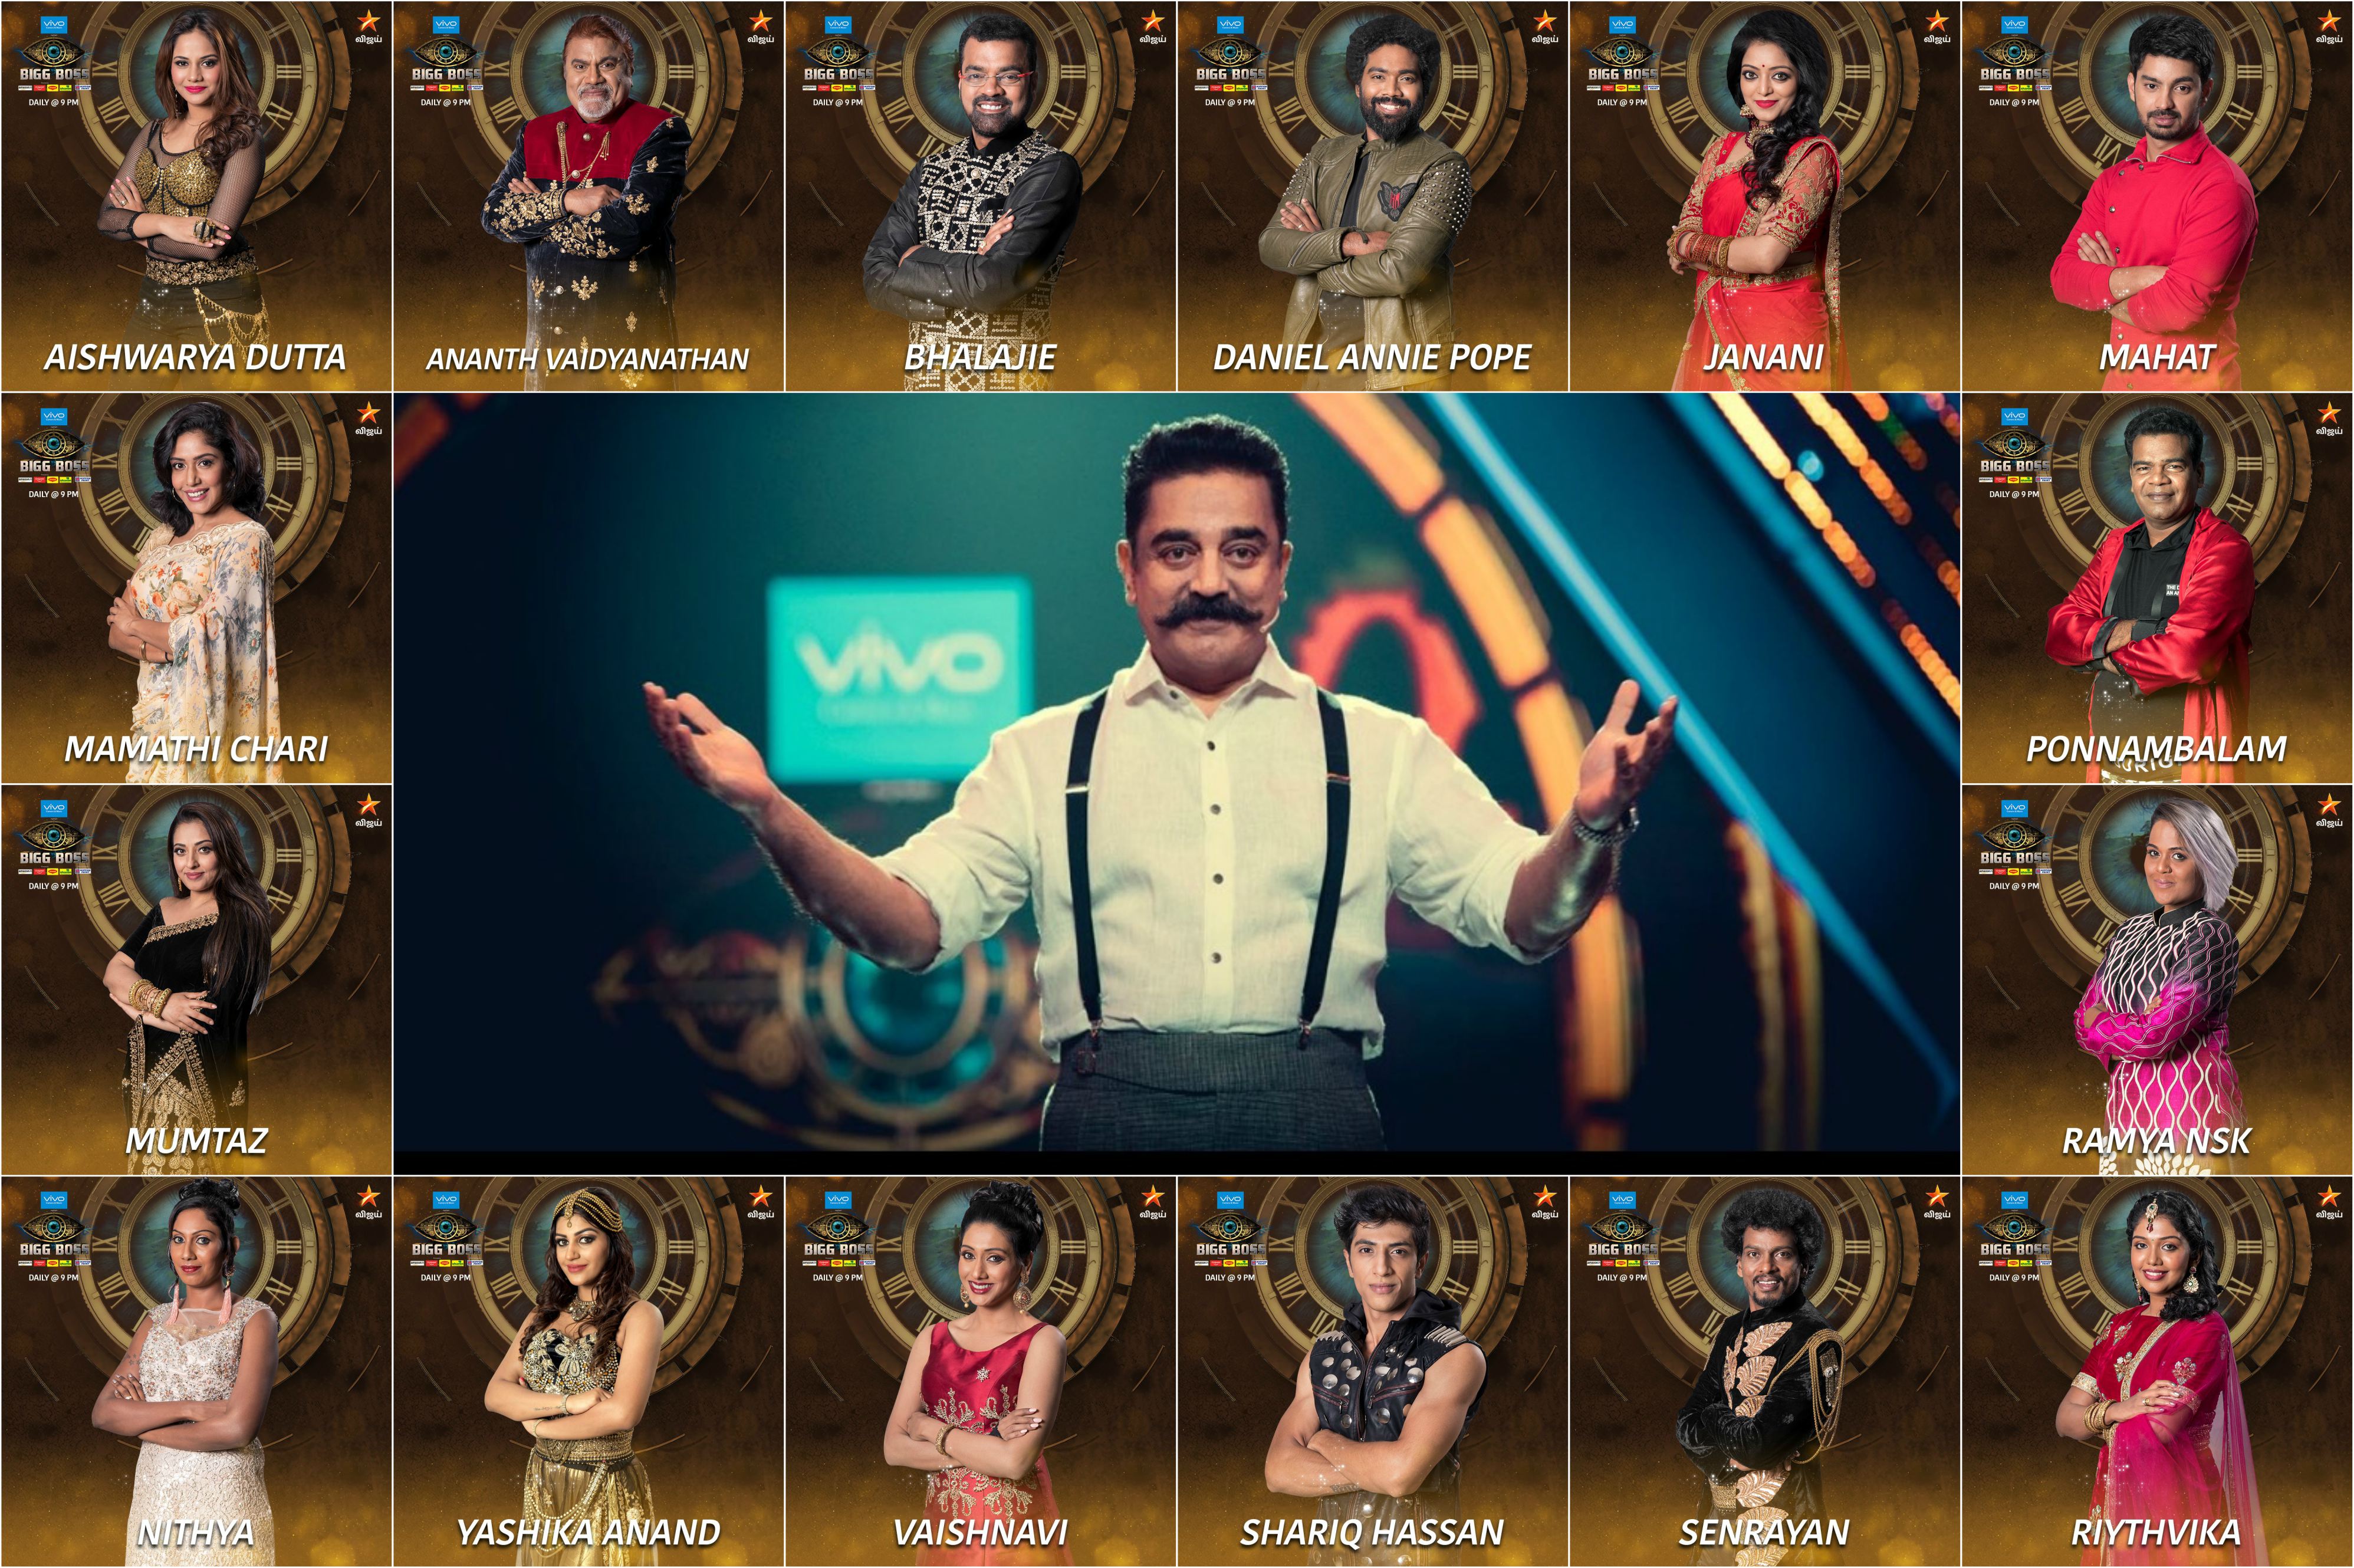 Bigg Boss Tamil All You Need To Know About This Season’s Contestants